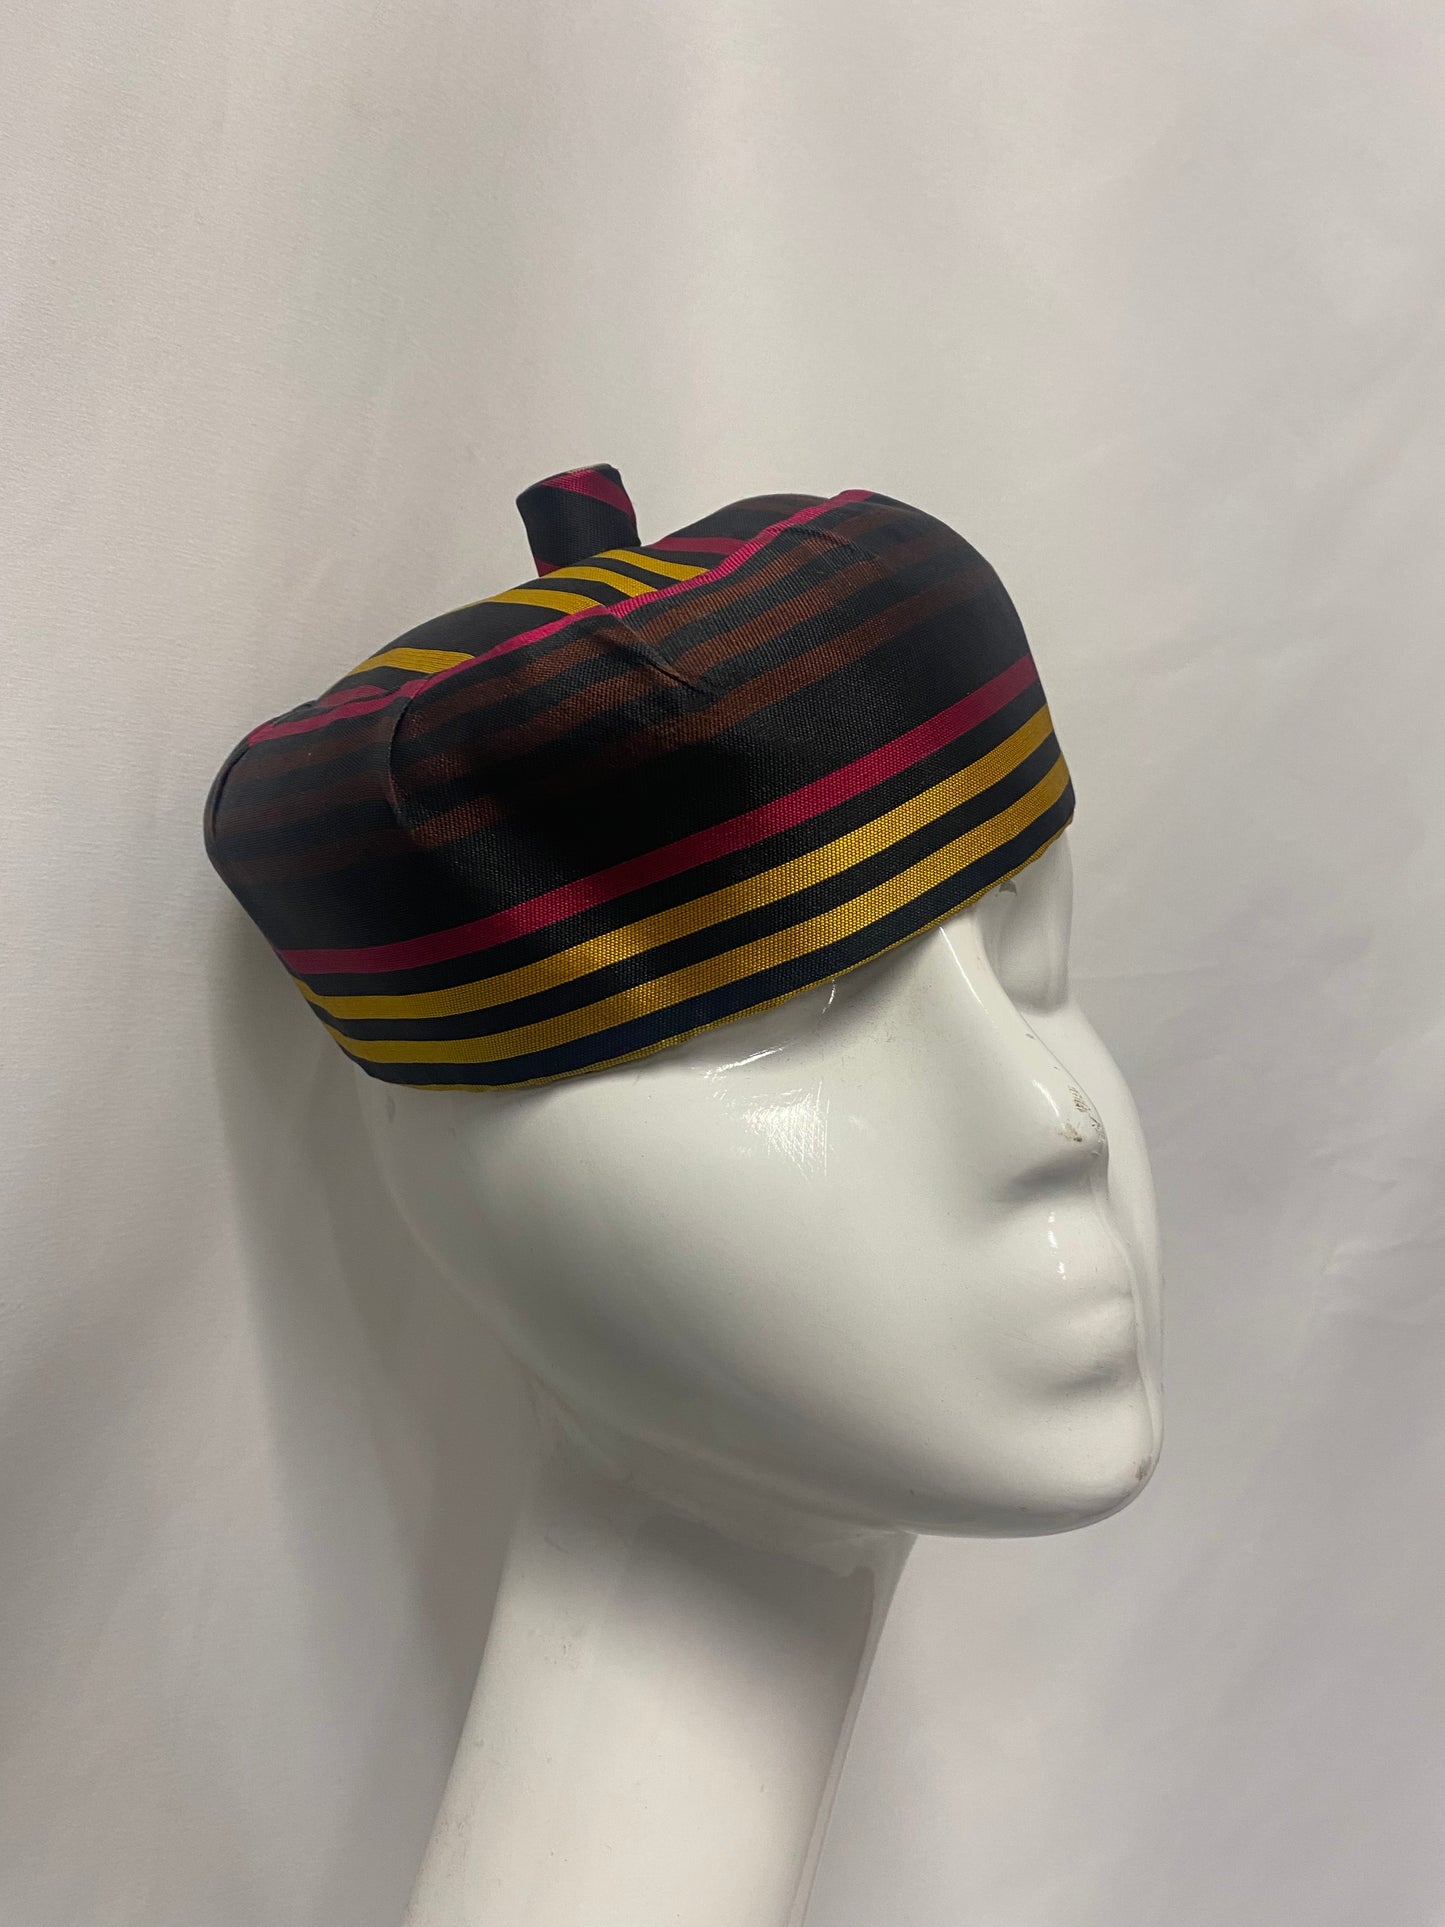 Bessies Vintage Black Pink Yellow Pillbox Hat with Comb